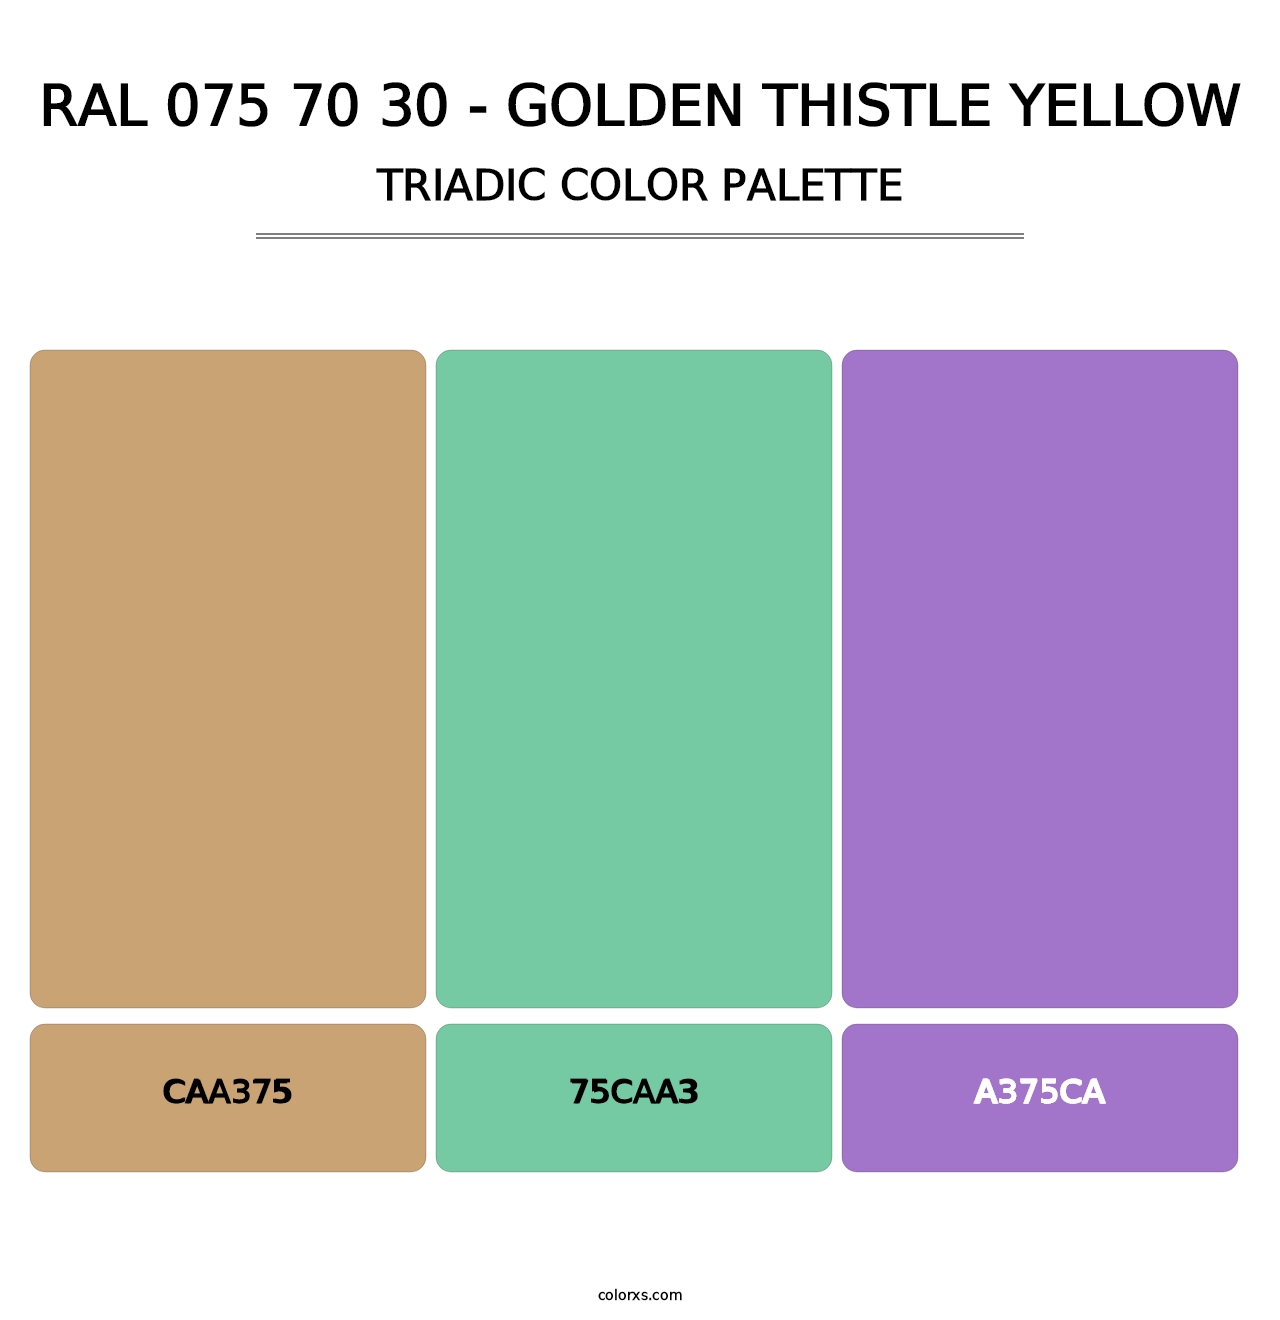 RAL 075 70 30 - Golden Thistle Yellow - Triadic Color Palette